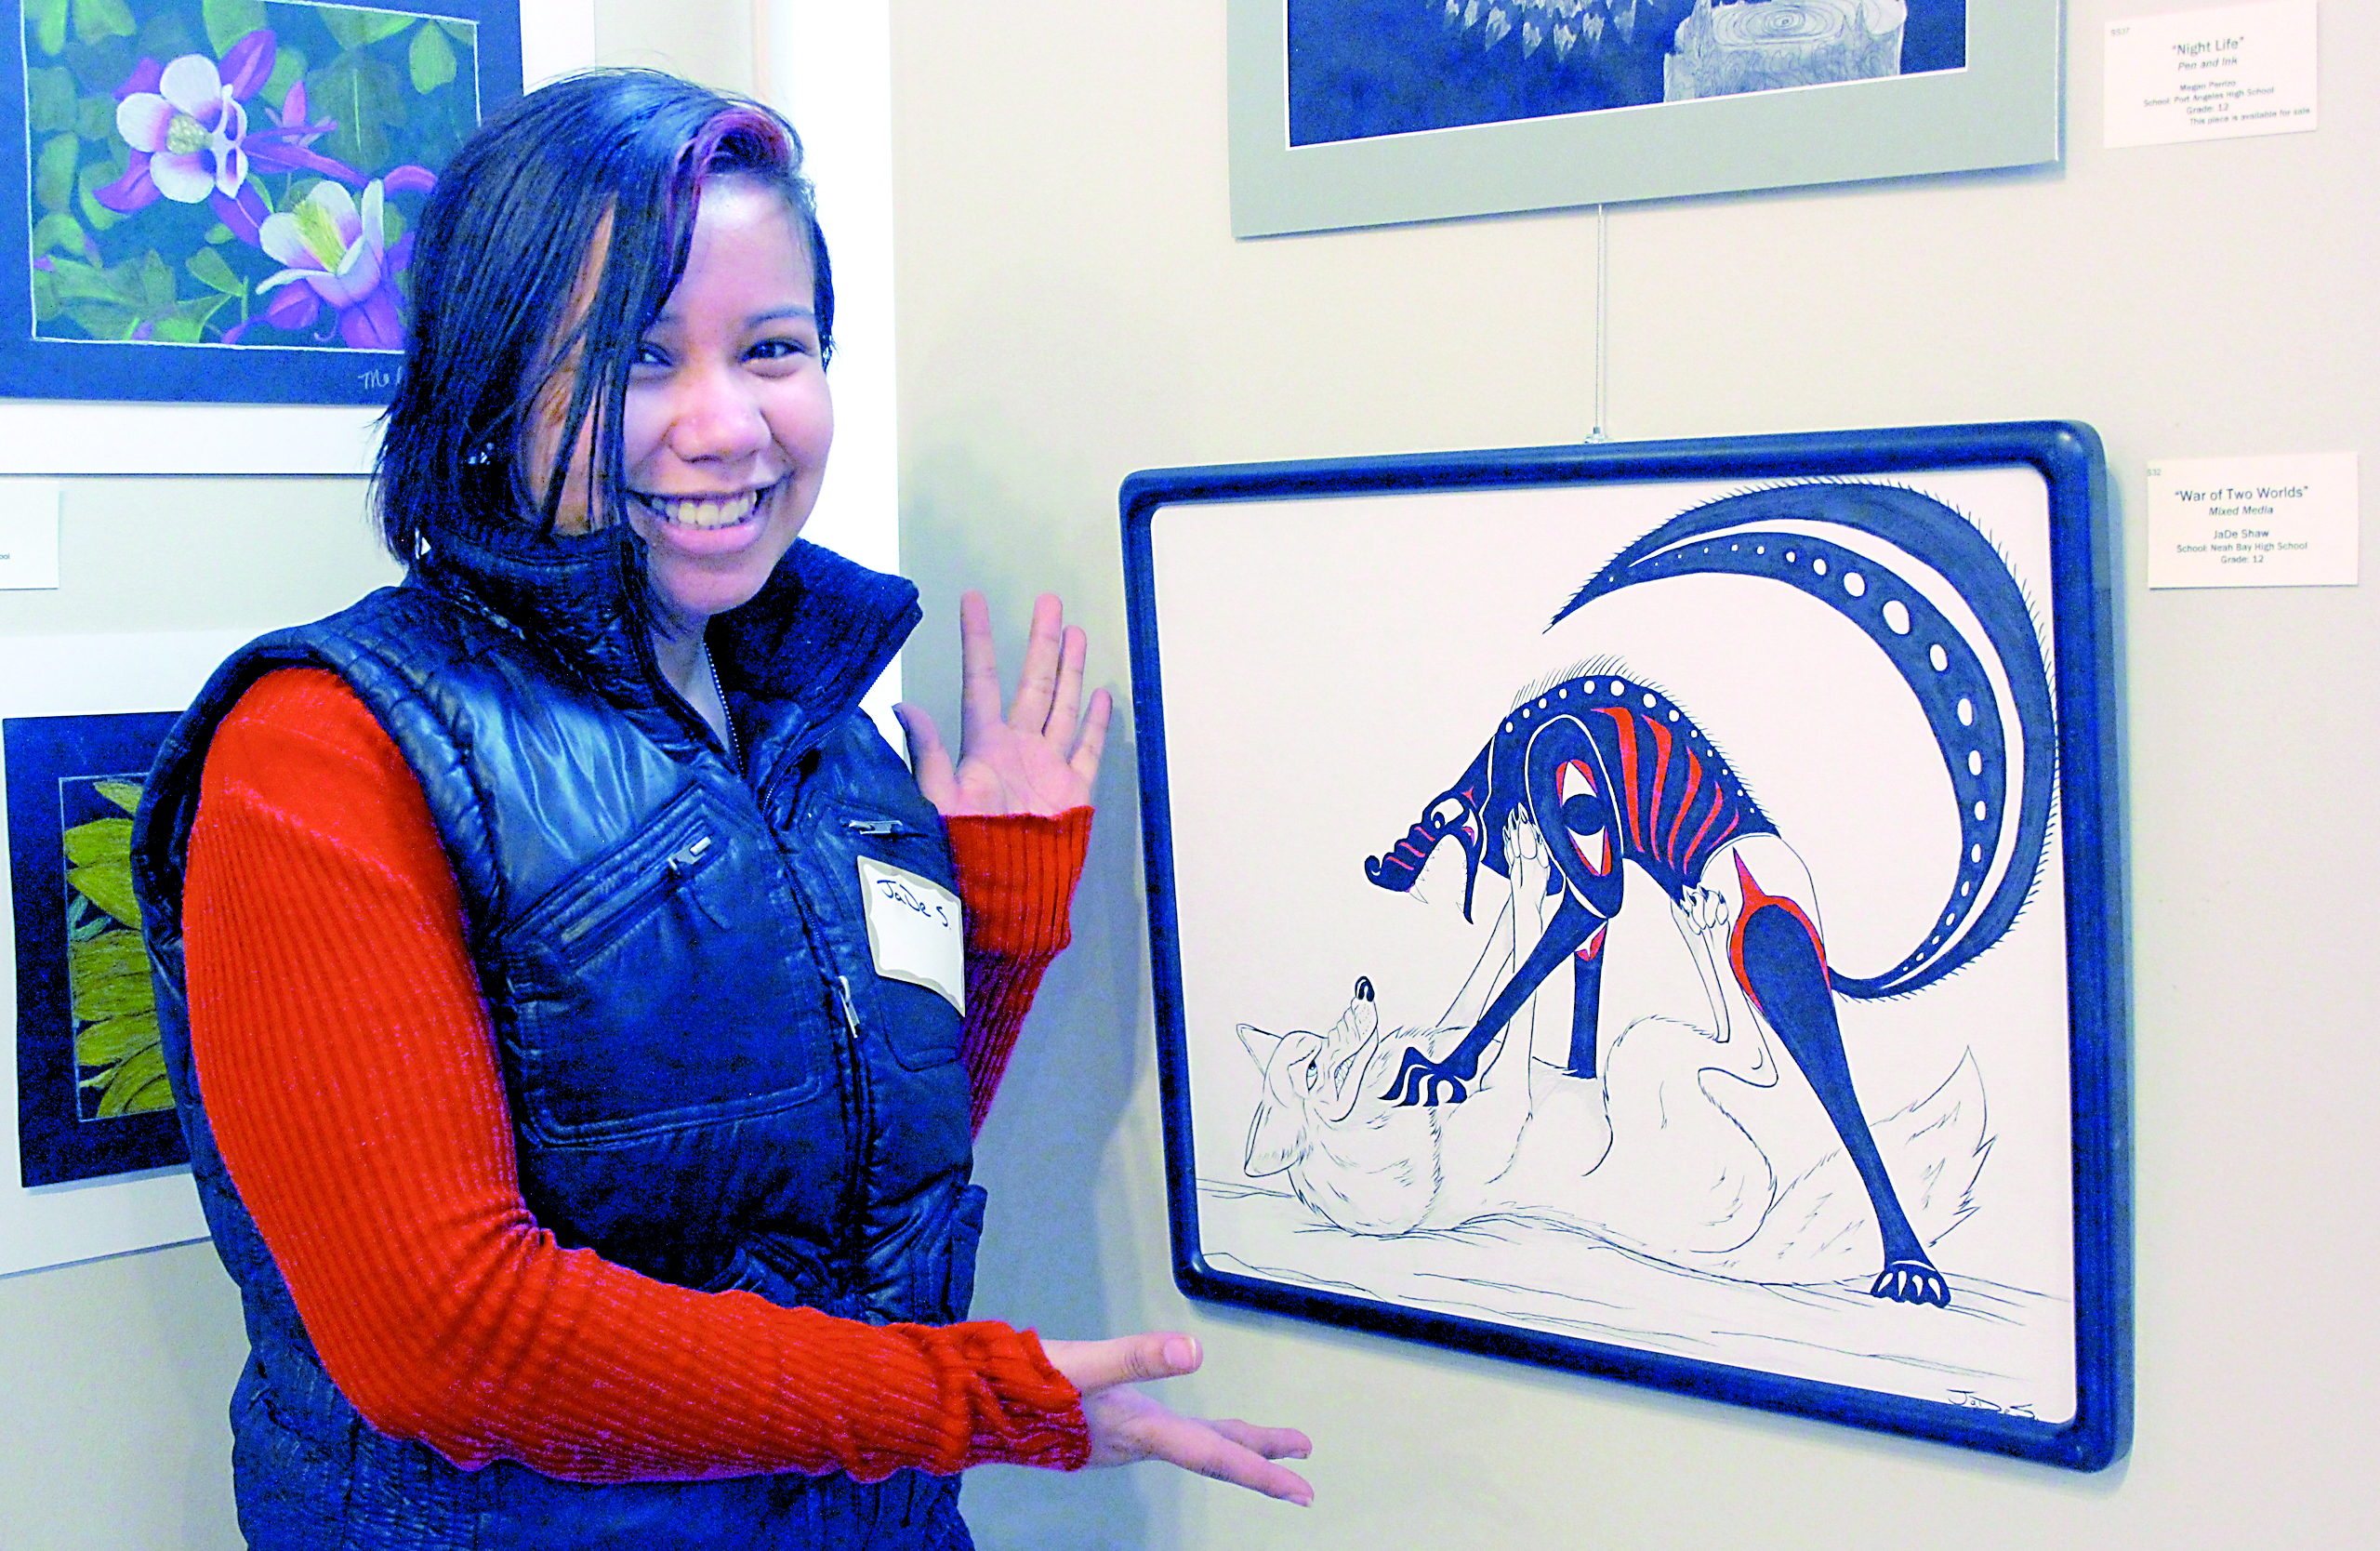 Neah Bay High School senior JaDe Shaw won the Sequim Arts Emerging Artist Award for her “War of Two Worlds.” The mixed-media work is part of the March exhibition at the Museum & Arts Center in Sequim. Renee Mizar